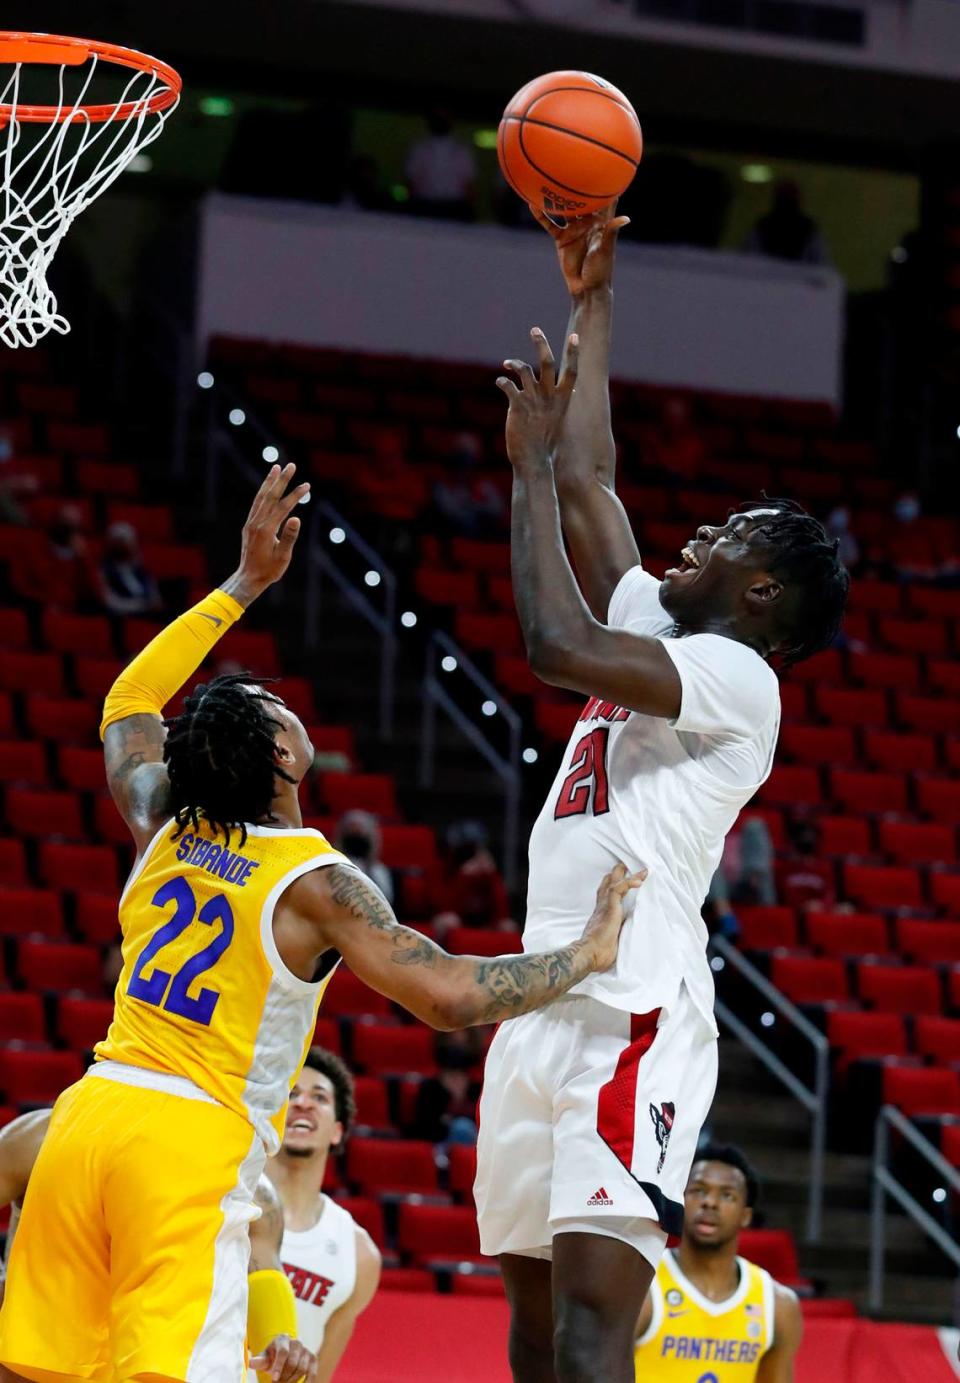 N.C. State’s Ebenezer Dowuona (21) shoots as Pittsburgh’s Nike Sibande (22) defends during the first half of N.C. State’s game against Pittsburgh at PNC Arena in Raleigh, N.C., Sunday, February 28, 2021.